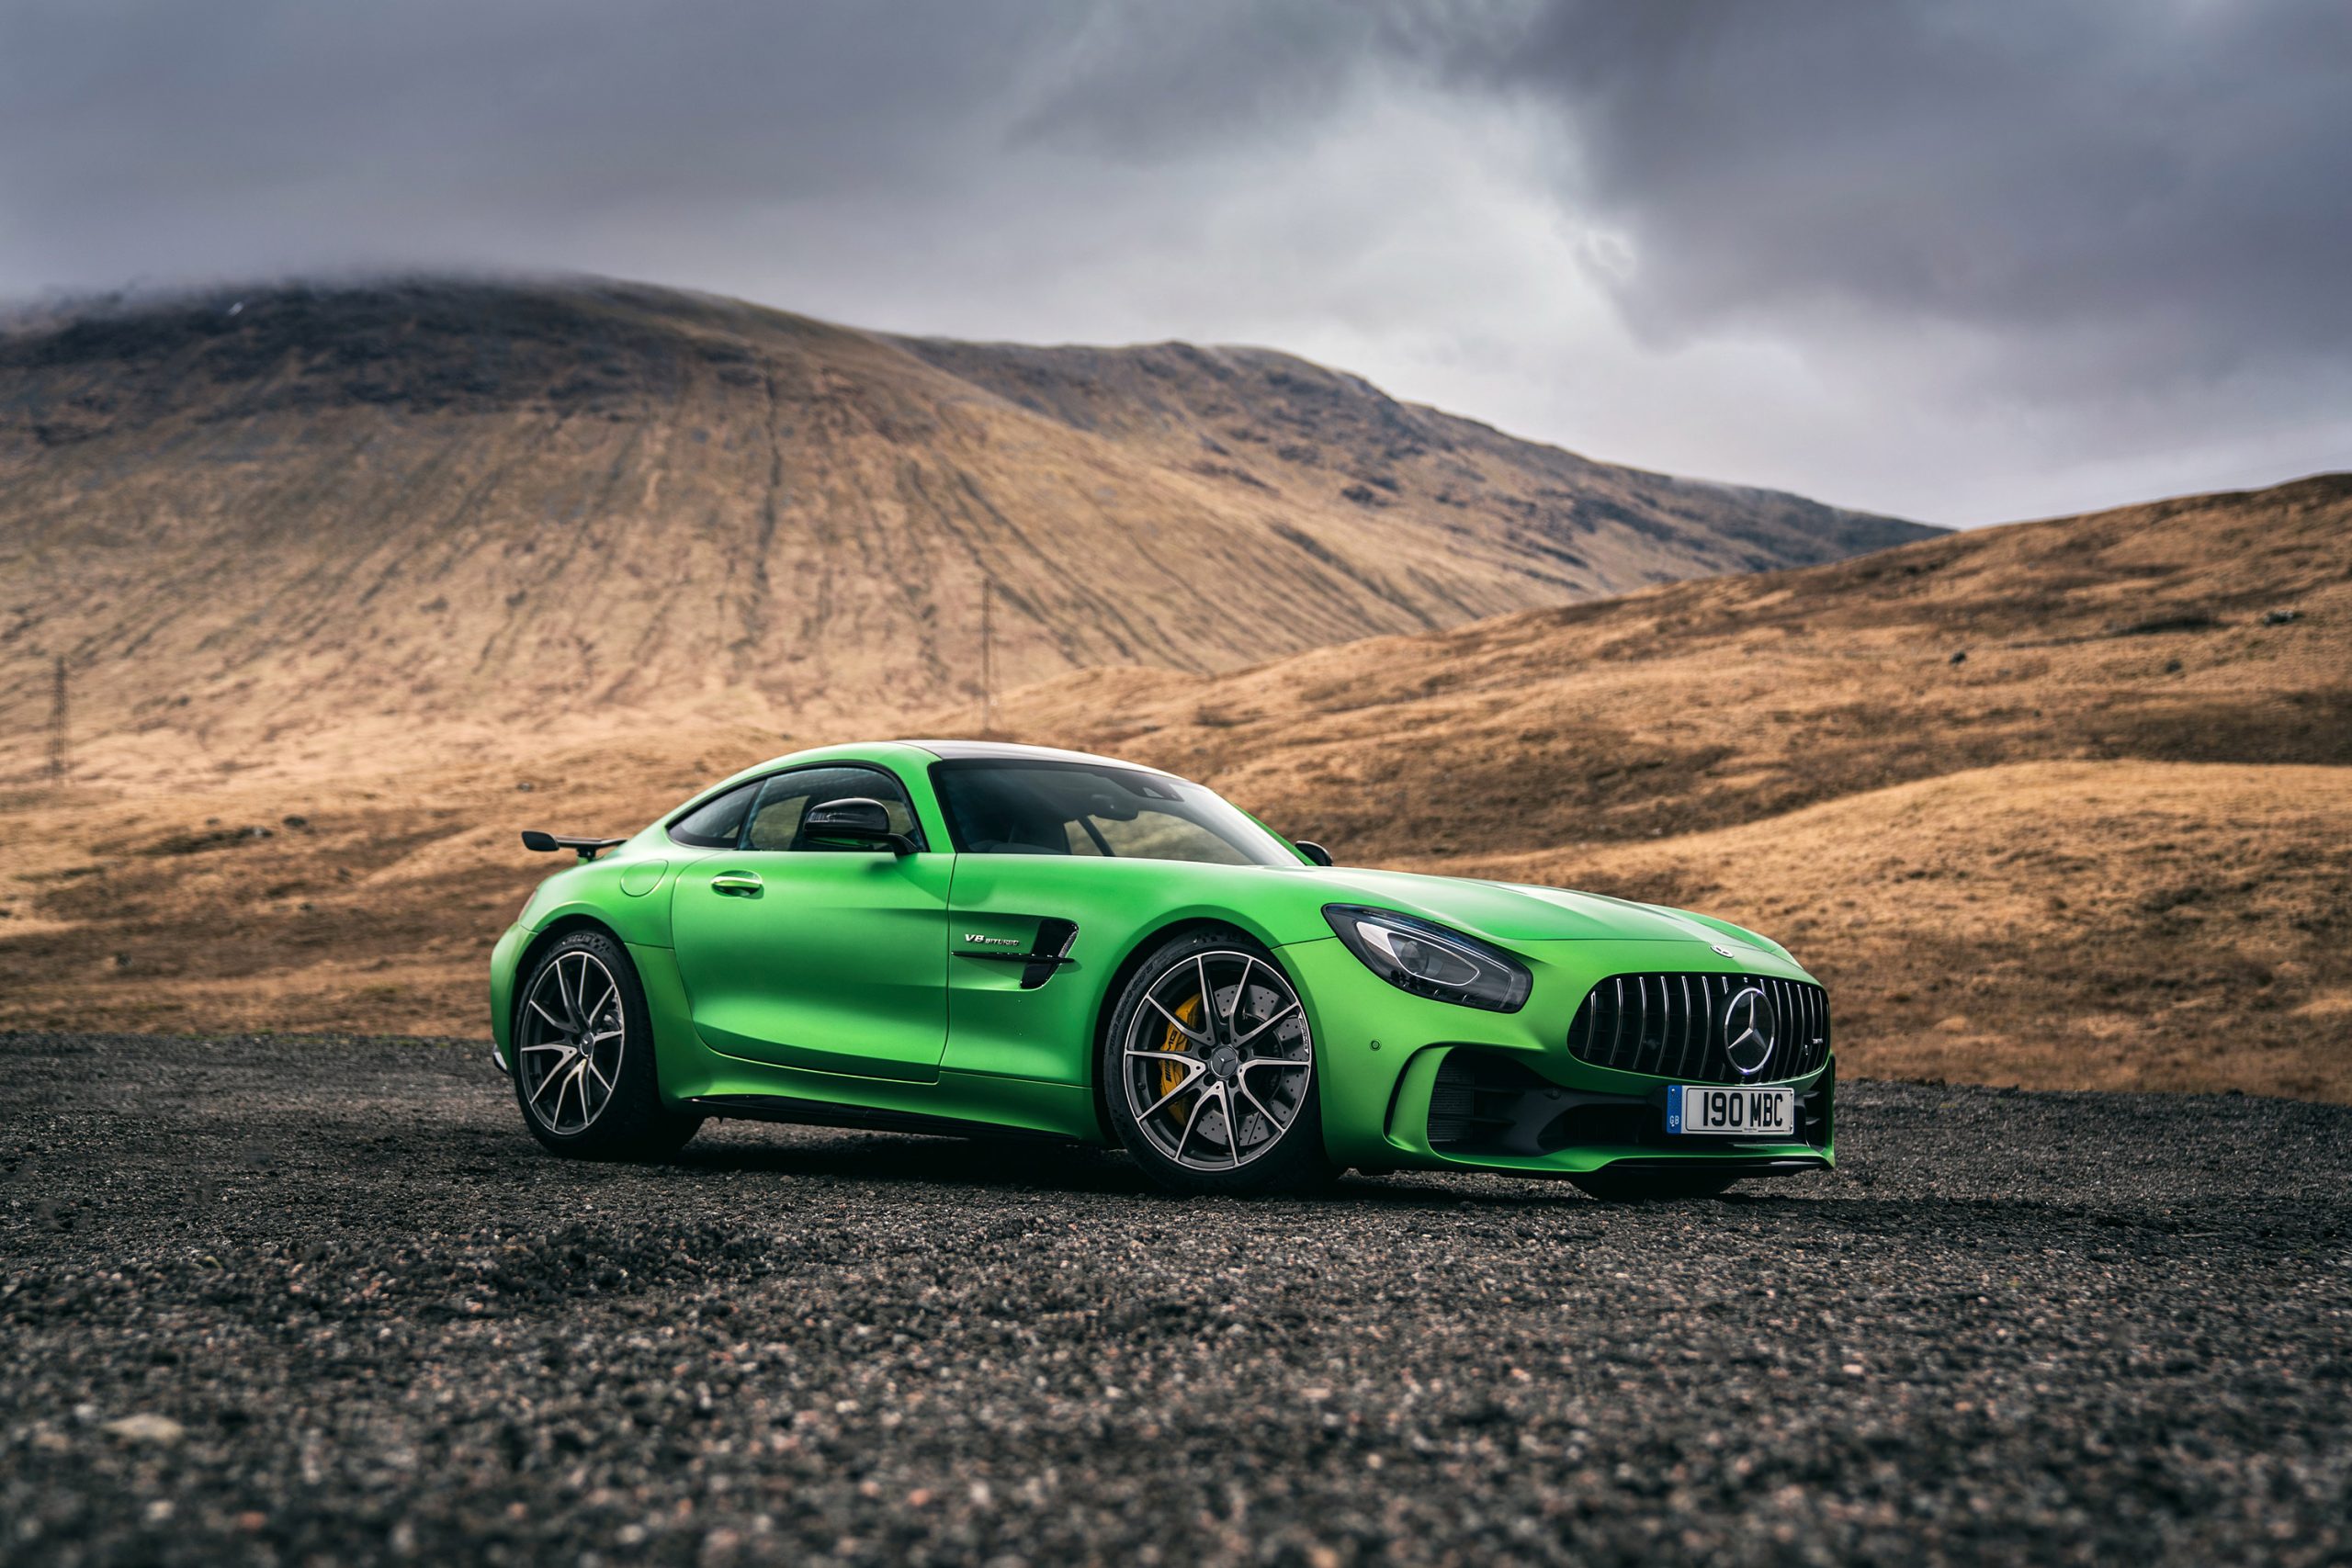 2017 Mercedes-AMG GT R Wallpaper Collection.